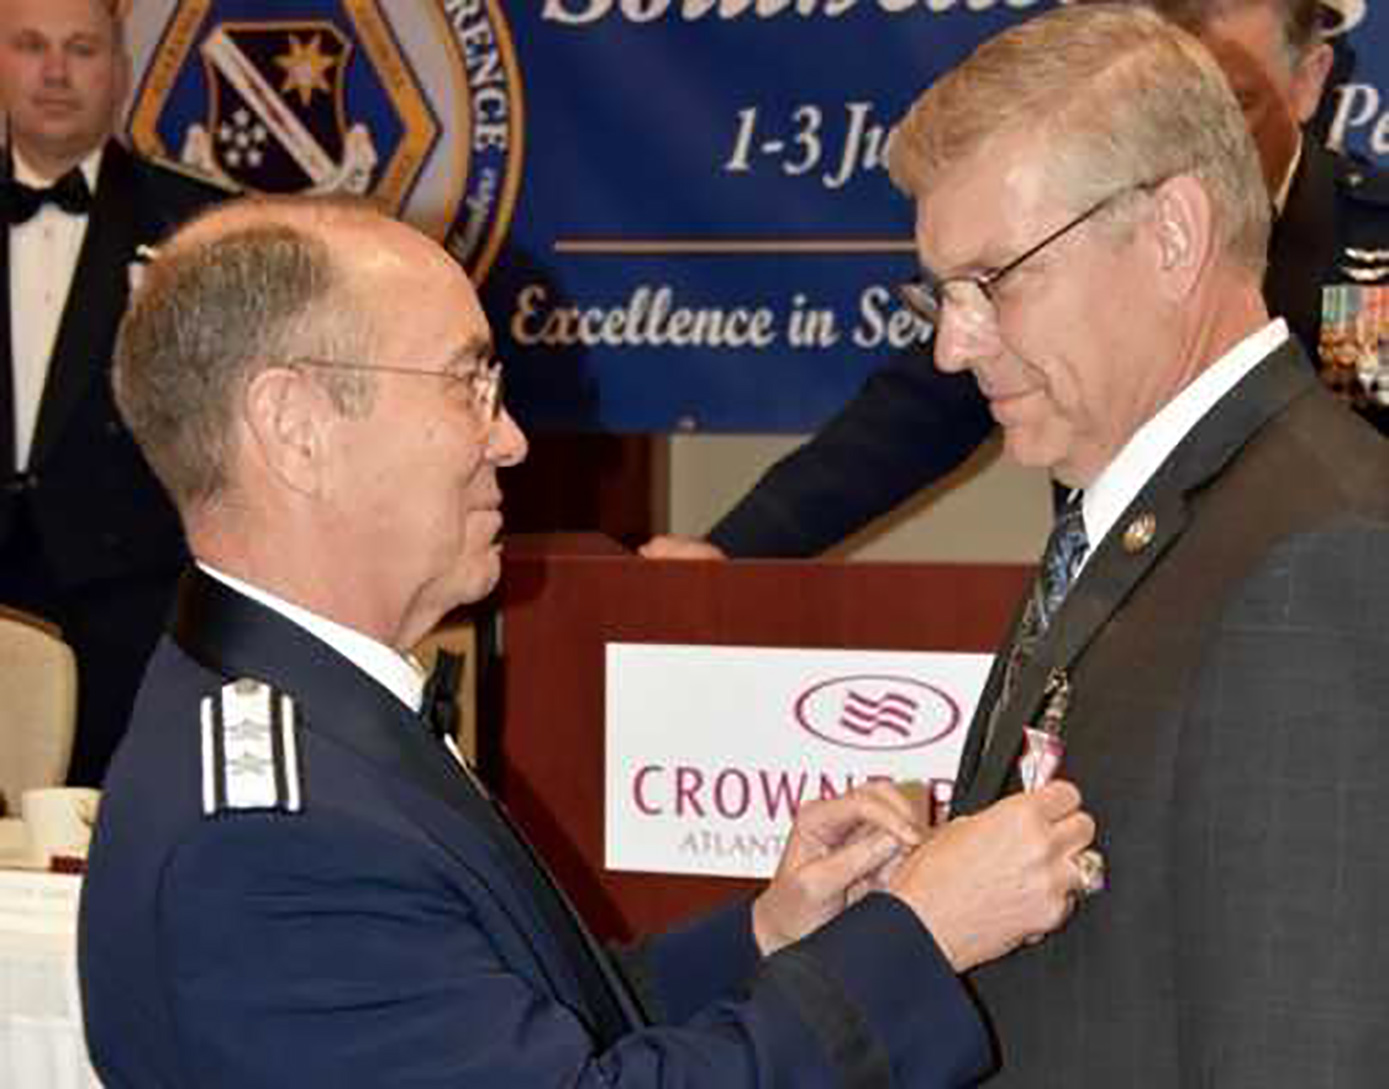 Rep. Barry Loudermilk (R-Ga.) was awarded the Civil Air Patrol’s Silver Medal of Valor for his actions during a June 2017 shooting at an Alexandria, Virginia, baseball field where members of Congress were practicing for a charity game. Photo courtesy of the Civil Air Patrol.